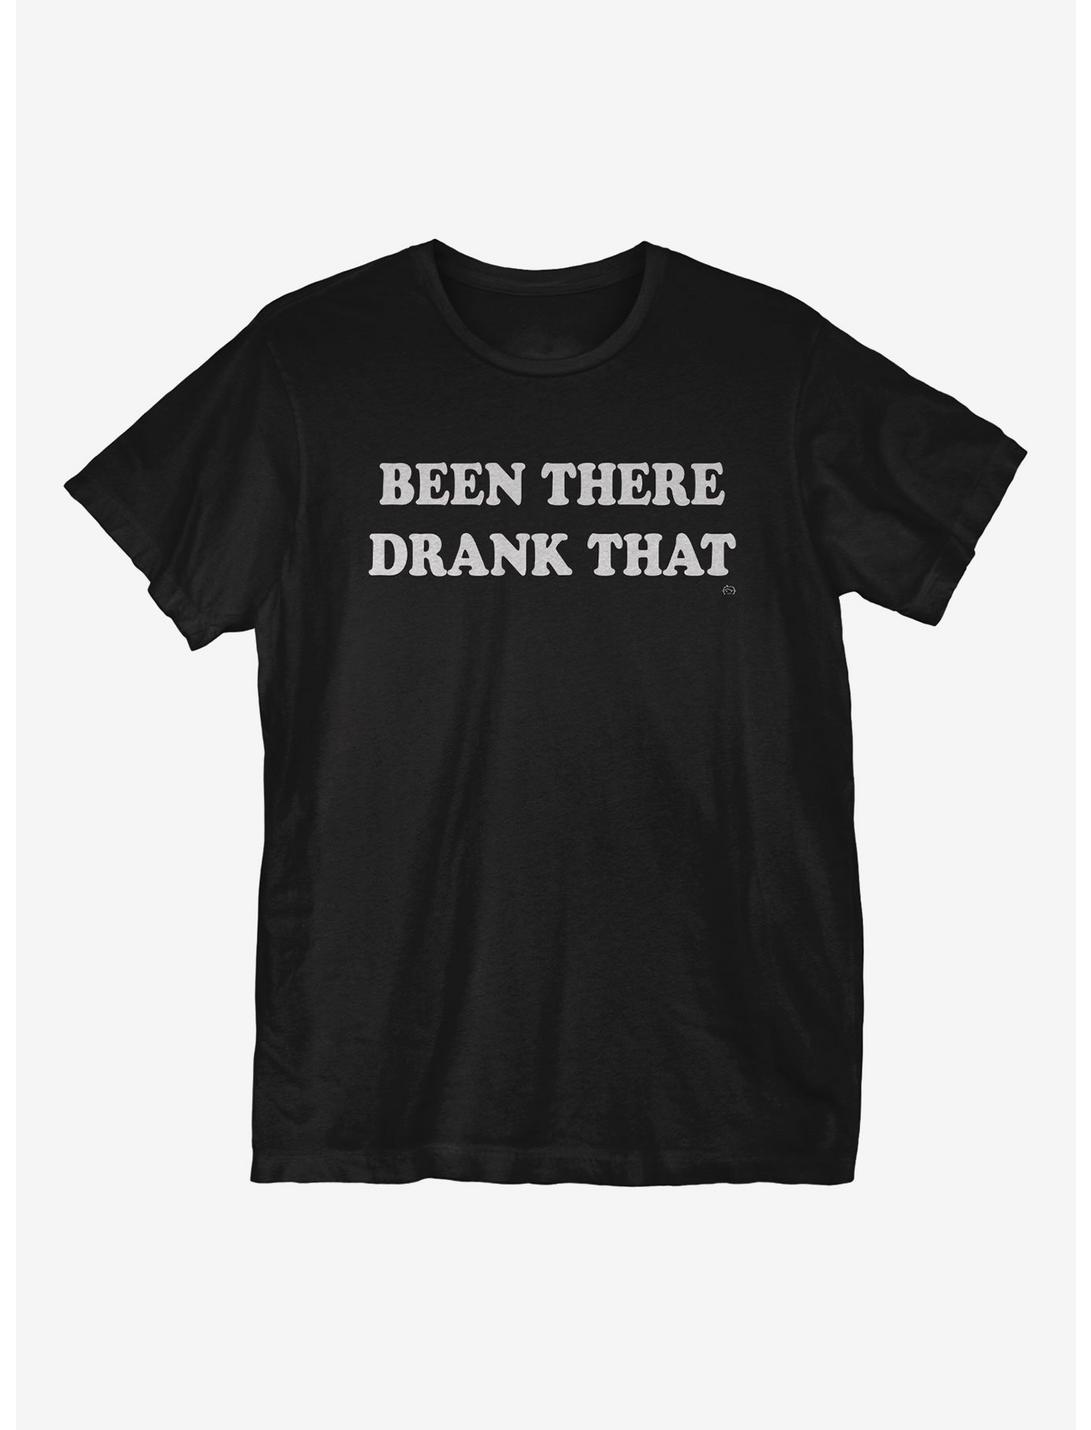 Been There T-Shirt, BLACK, hi-res